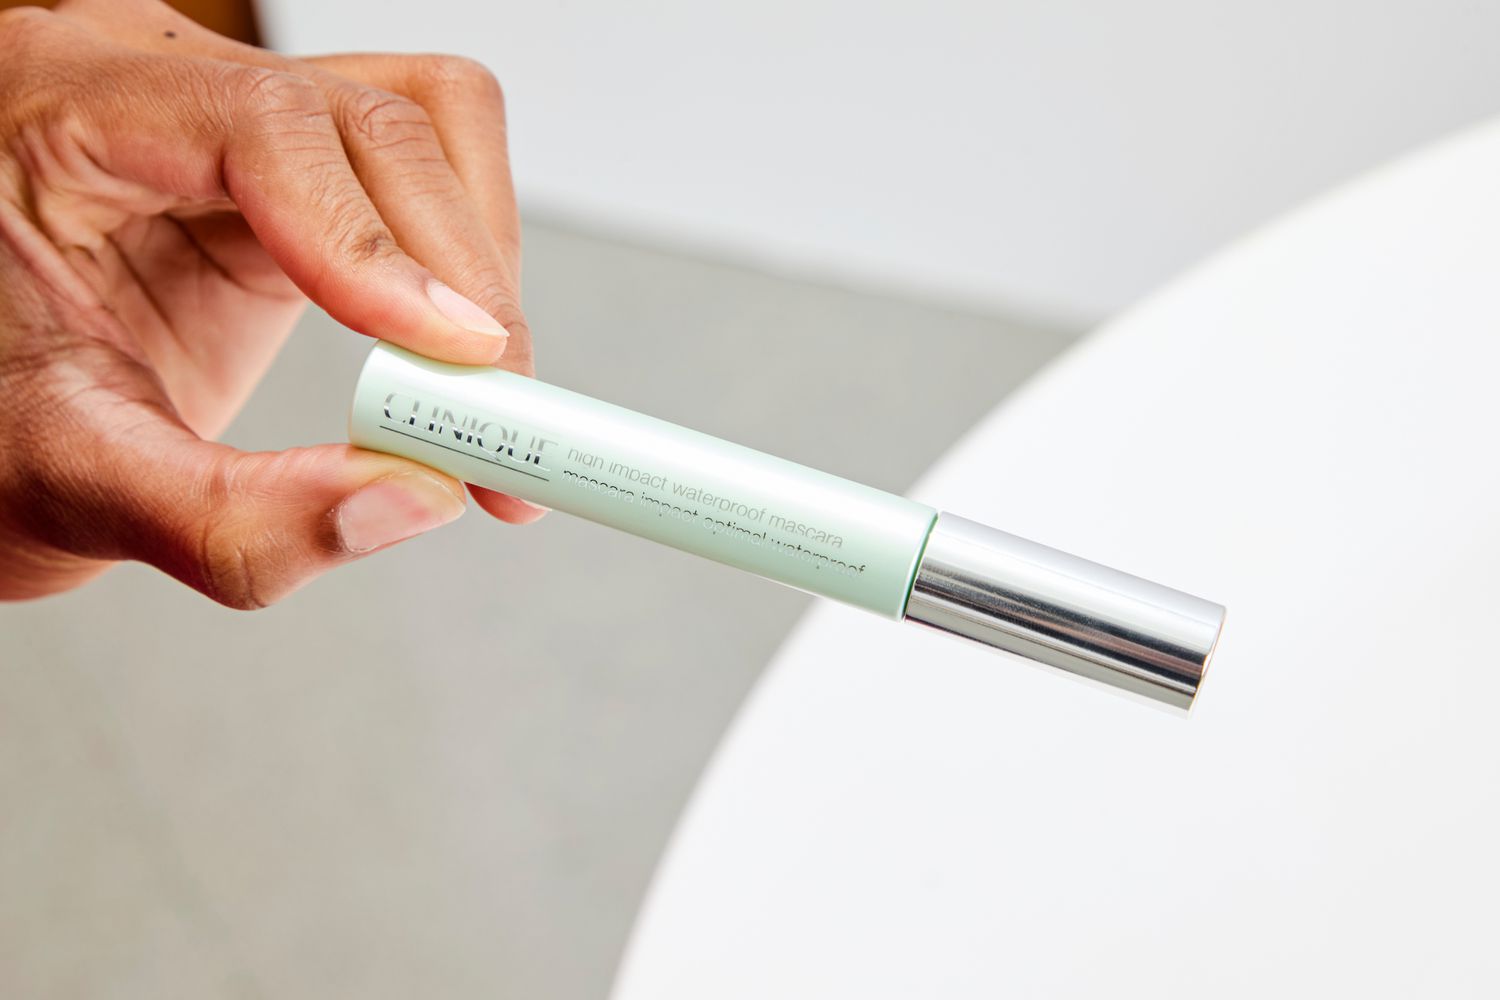 A person holds up a tube of Clinique High Impact Waterproof Mascara